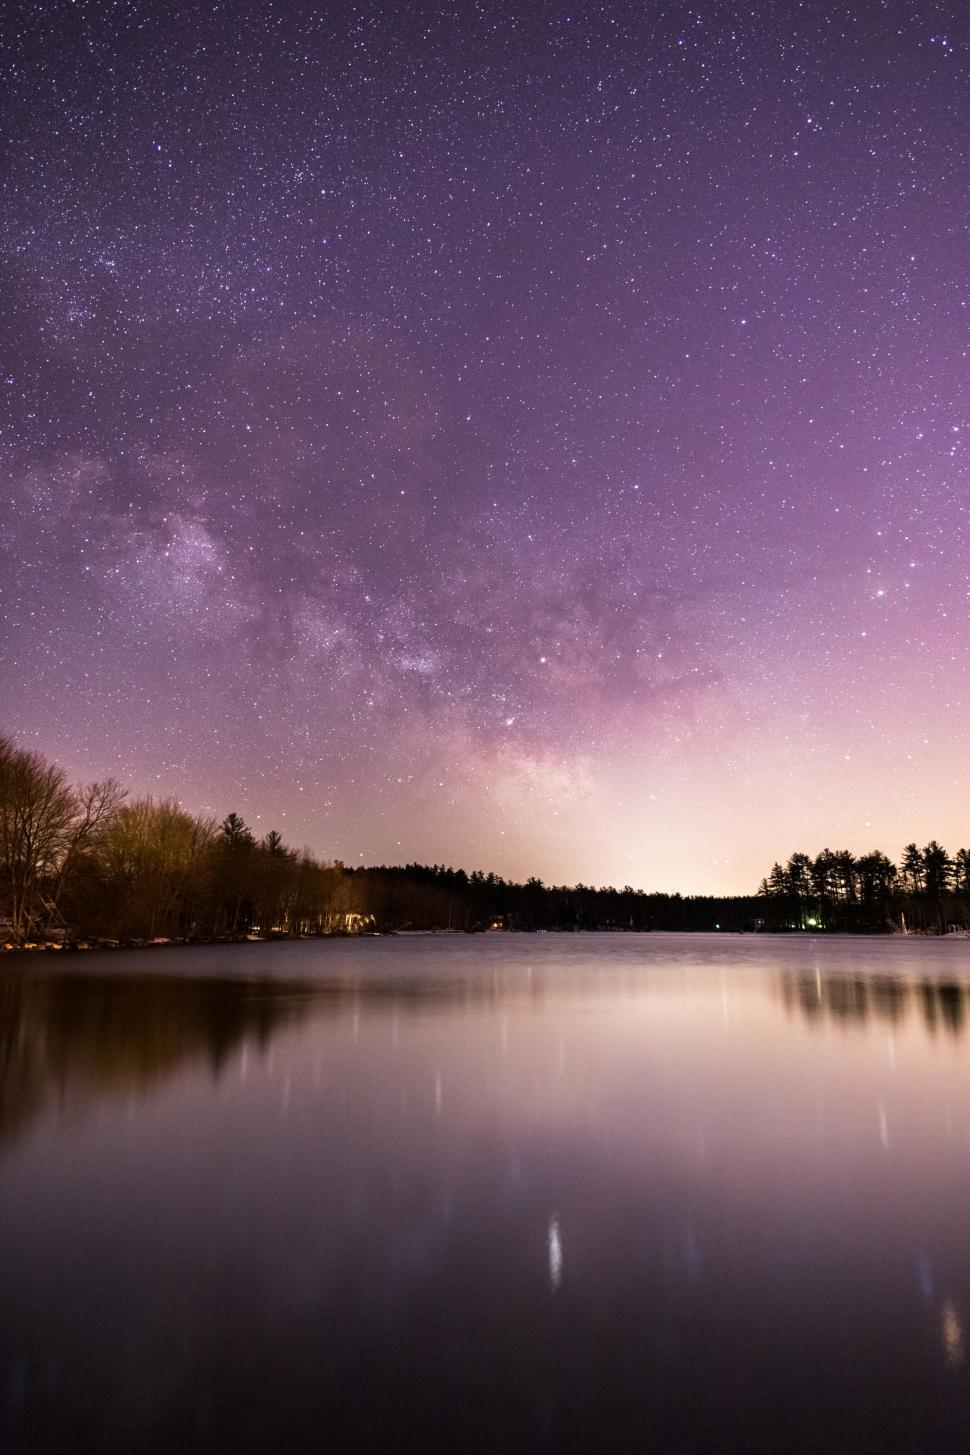 Free Image of Starry night sky over tranquil lake 